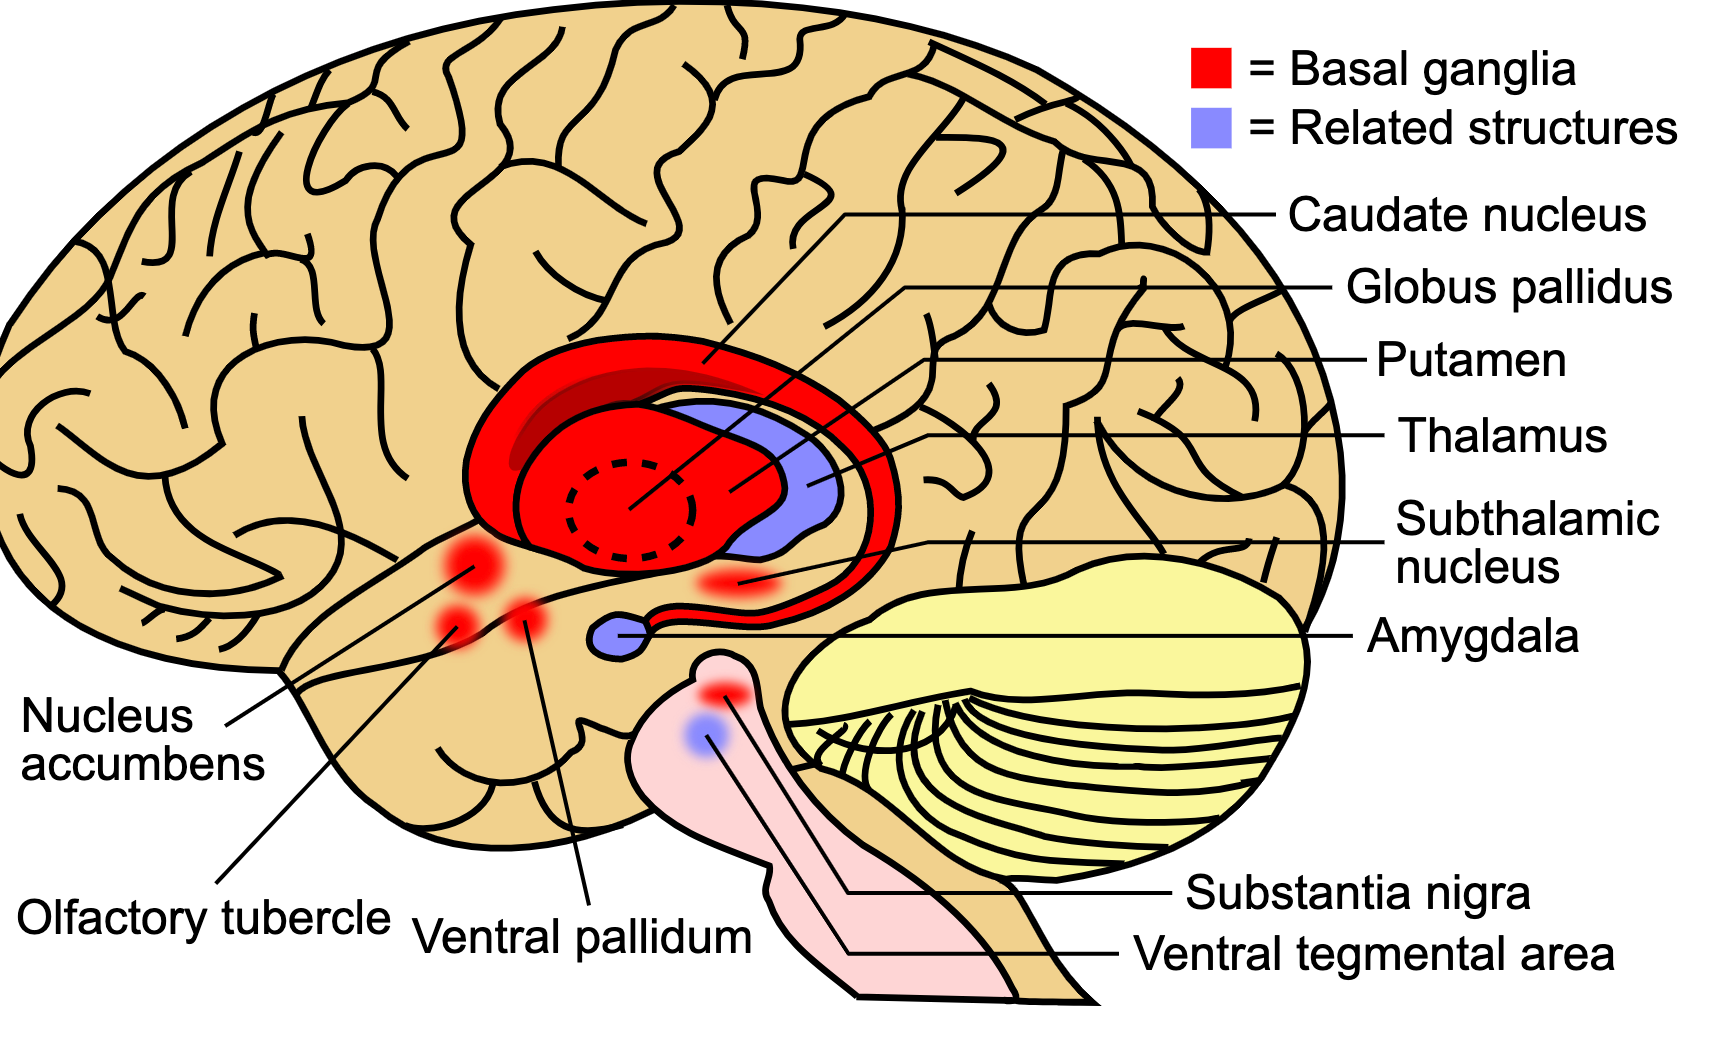 Image of the brain subcortex labeled